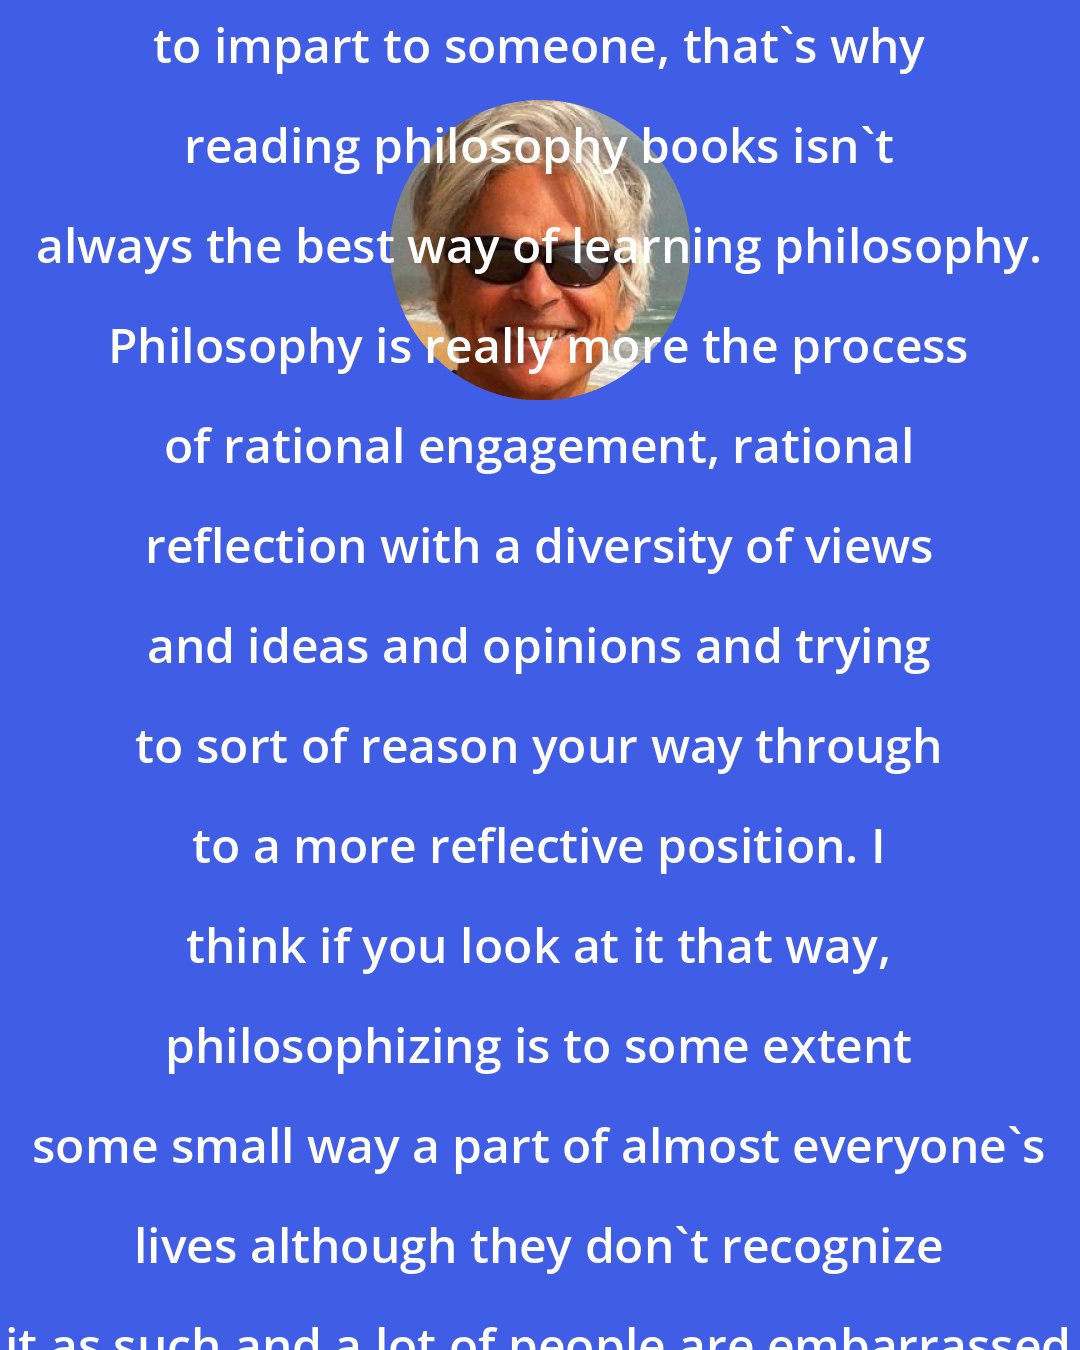 Dale Jamieson: Philosophy is not a body of knowledge to impart to someone, that's why reading philosophy books isn't always the best way of learning philosophy. Philosophy is really more the process of rational engagement, rational reflection with a diversity of views and ideas and opinions and trying to sort of reason your way through to a more reflective position. I think if you look at it that way, philosophizing is to some extent some small way a part of almost everyone's lives although they don't recognize it as such and a lot of people are embarrassed about it.